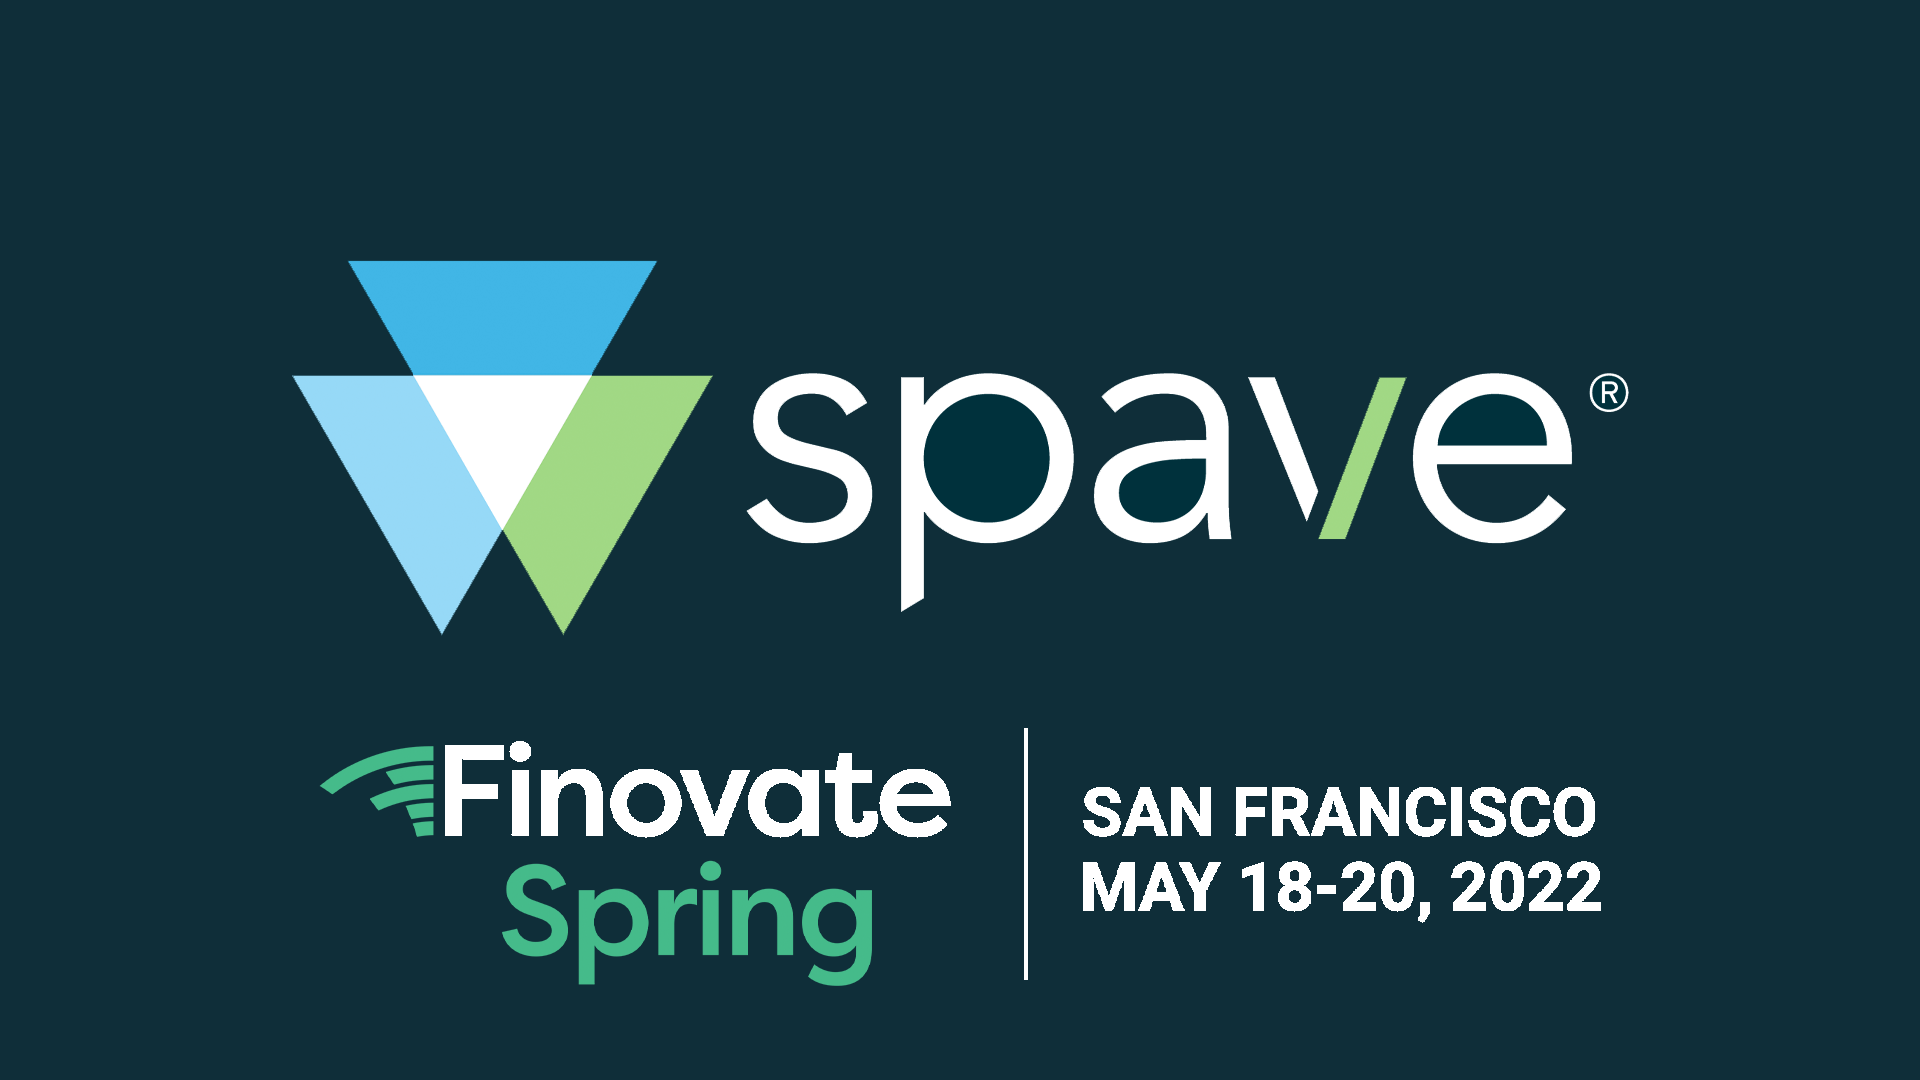 Spave will be featured at FinovateSpring 2022